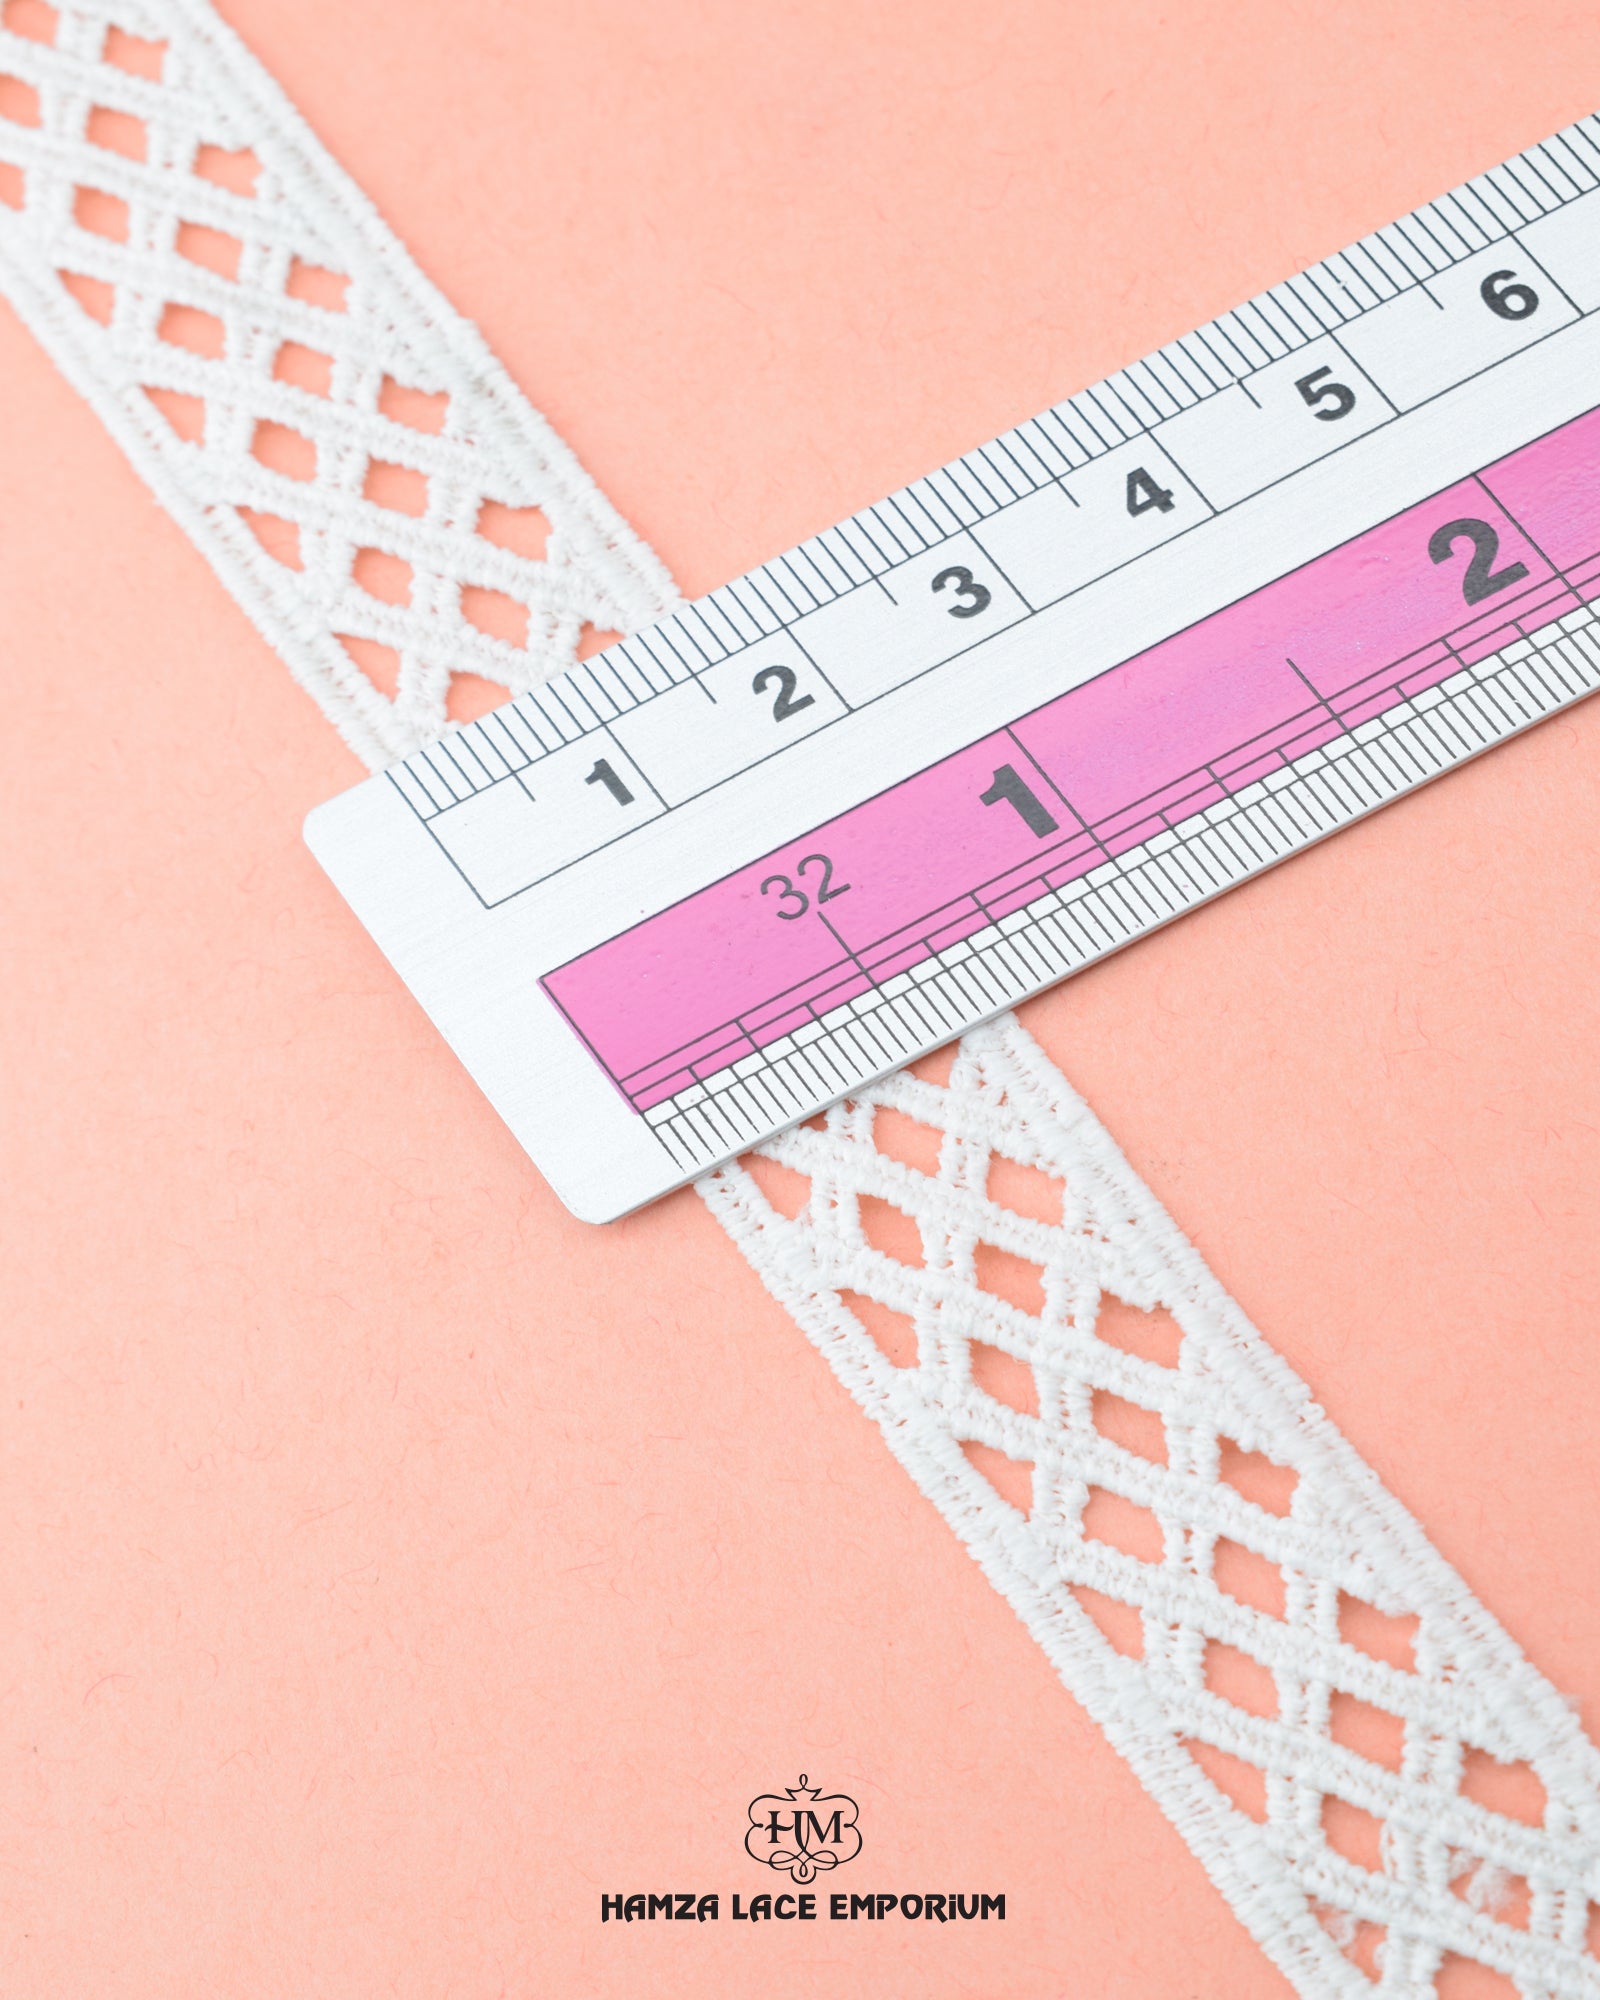 The size of the 'Center Filling Lace 7047' is given with the help of a ruler.